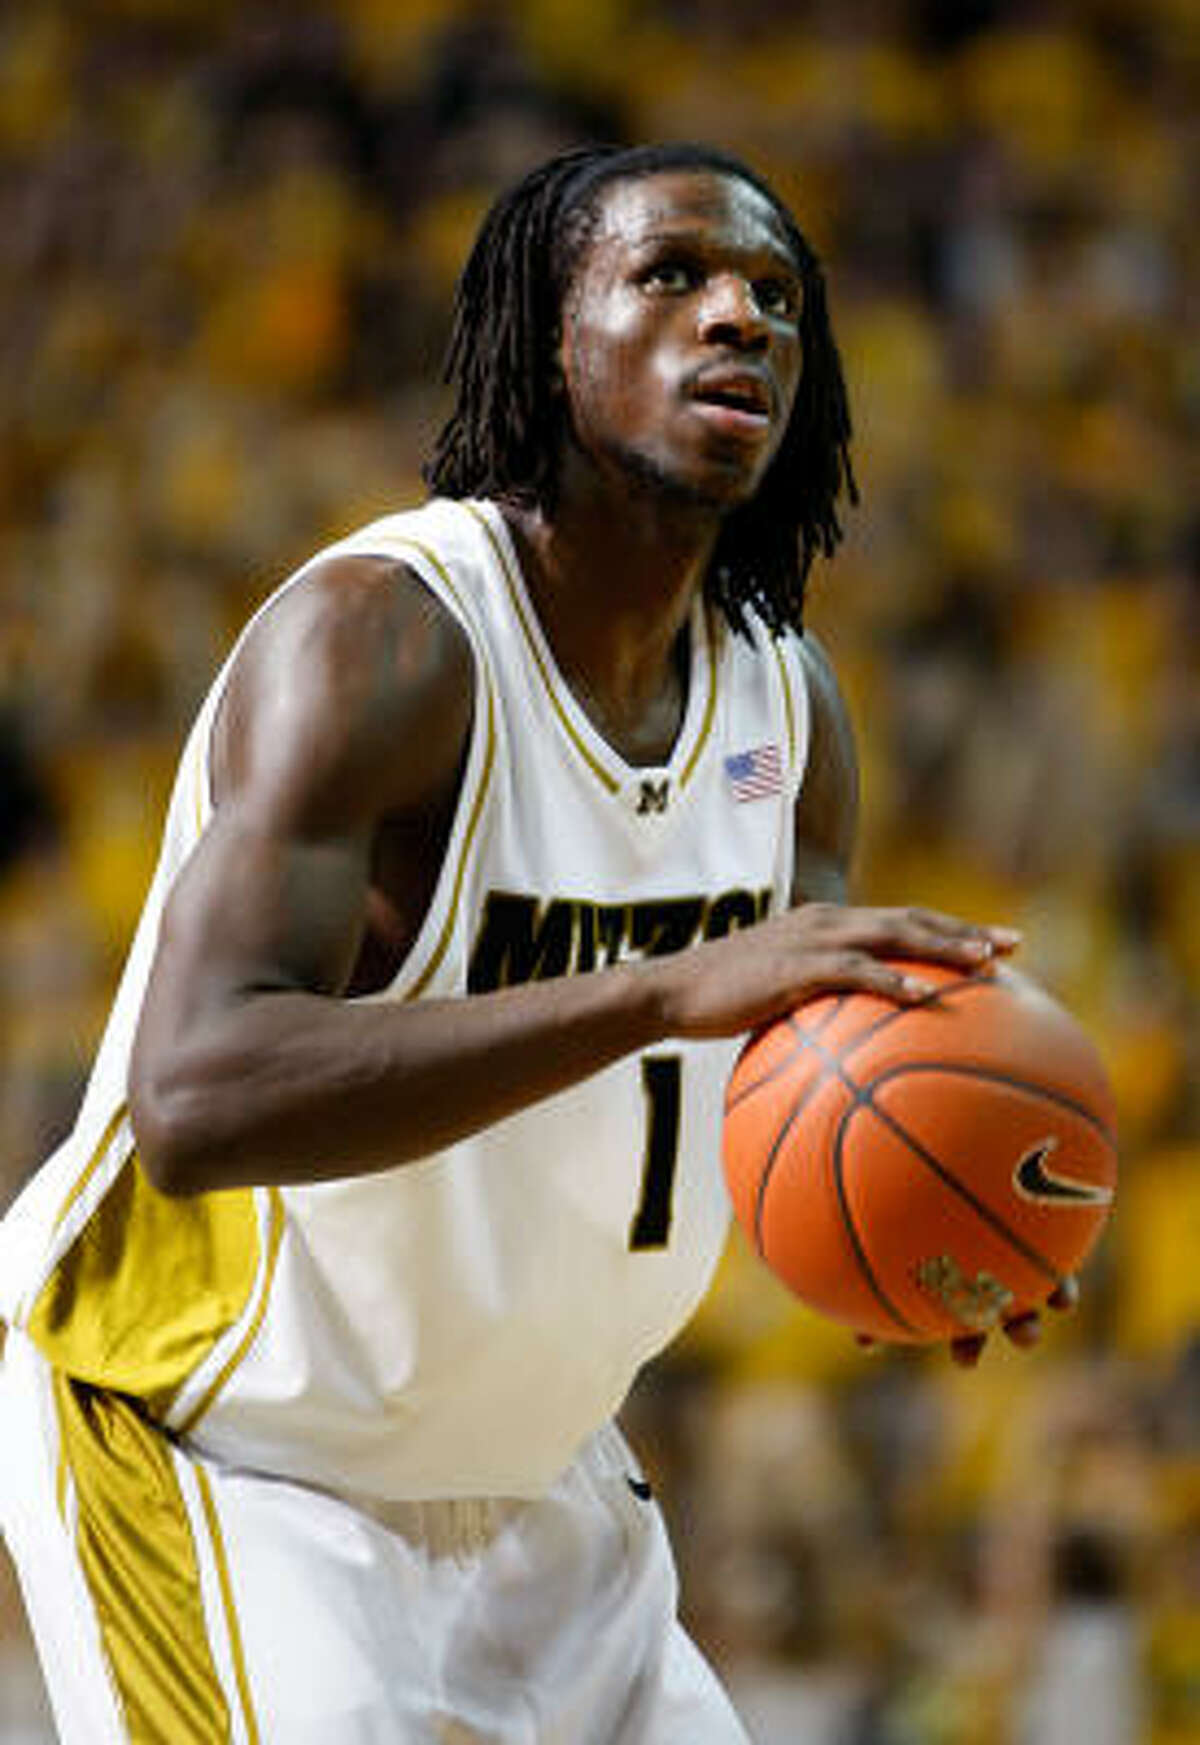 Missouri (25-6): The Tigers' nine-game improvement from 16-16 last season was their biggest in 15 years. Forward DeMarre Carroll (photo) was a first-team all-conference selection after averaging 17.1 points and 7.3 rebounds. This is only the second opening-round bye for the Tigers in league history.